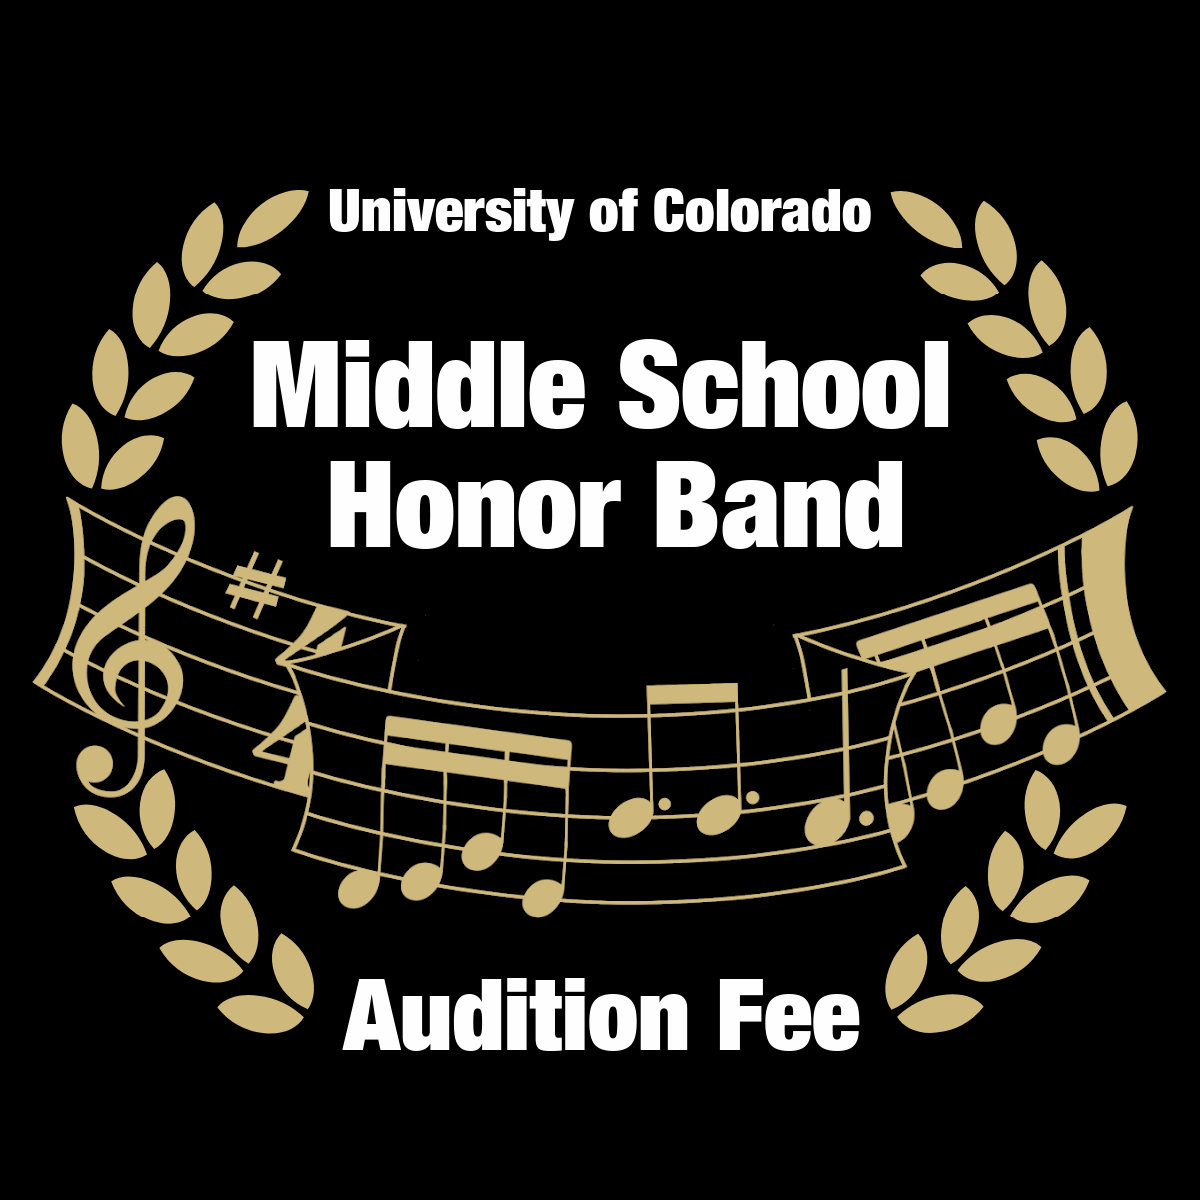 Audition Fee: University of Colorado Middle School Honor Band